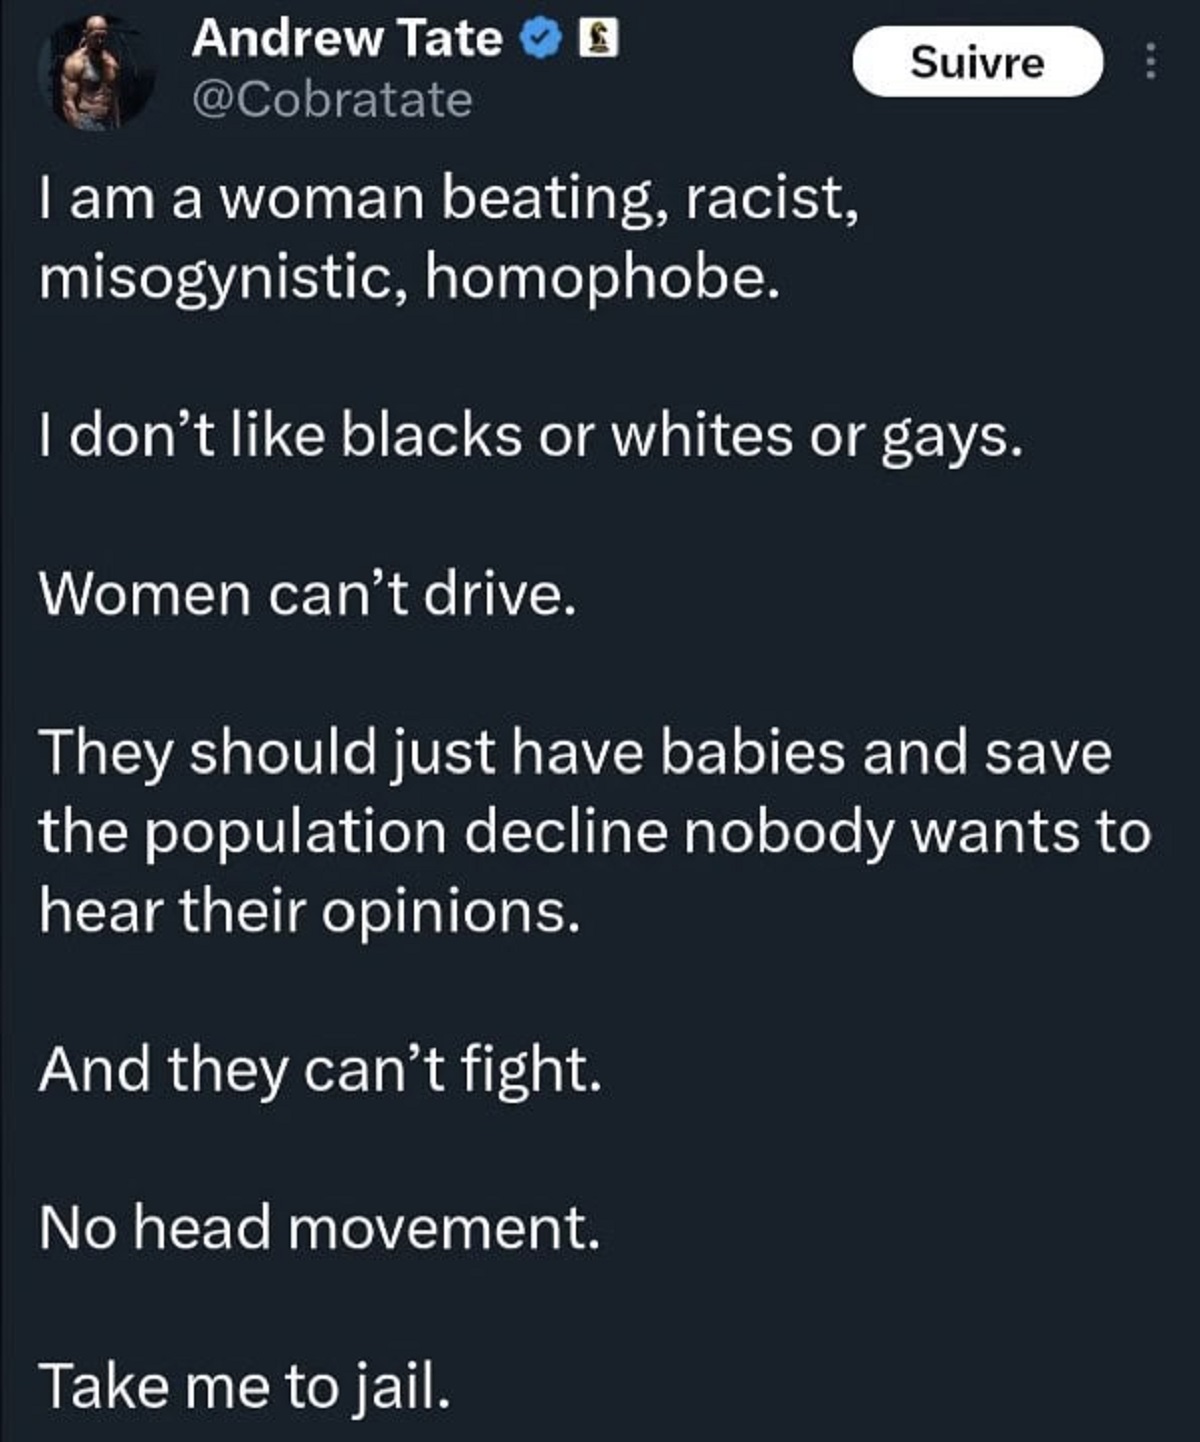 screenshot - Andrew Tate I am a woman beating, racist, misogynistic, homophobe. Suivre I don't blacks or whites or gays. Women can't drive. They should just have babies and save the population decline nobody wants to hear their opinions. And they can't fi